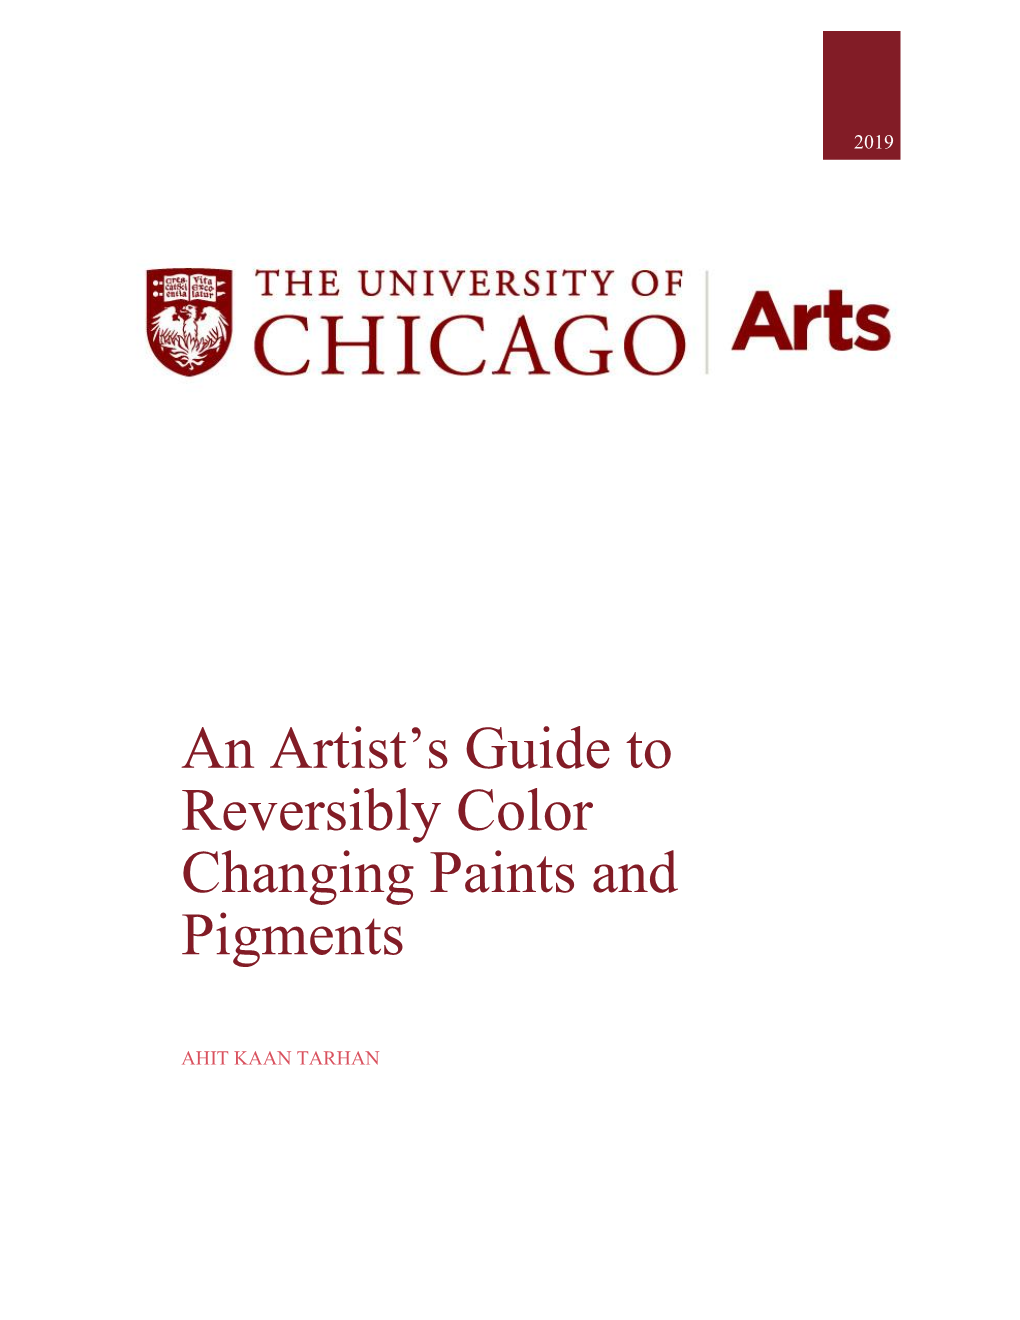 An Artist's Guide to Reversibly Color Changing Paints and Pigments